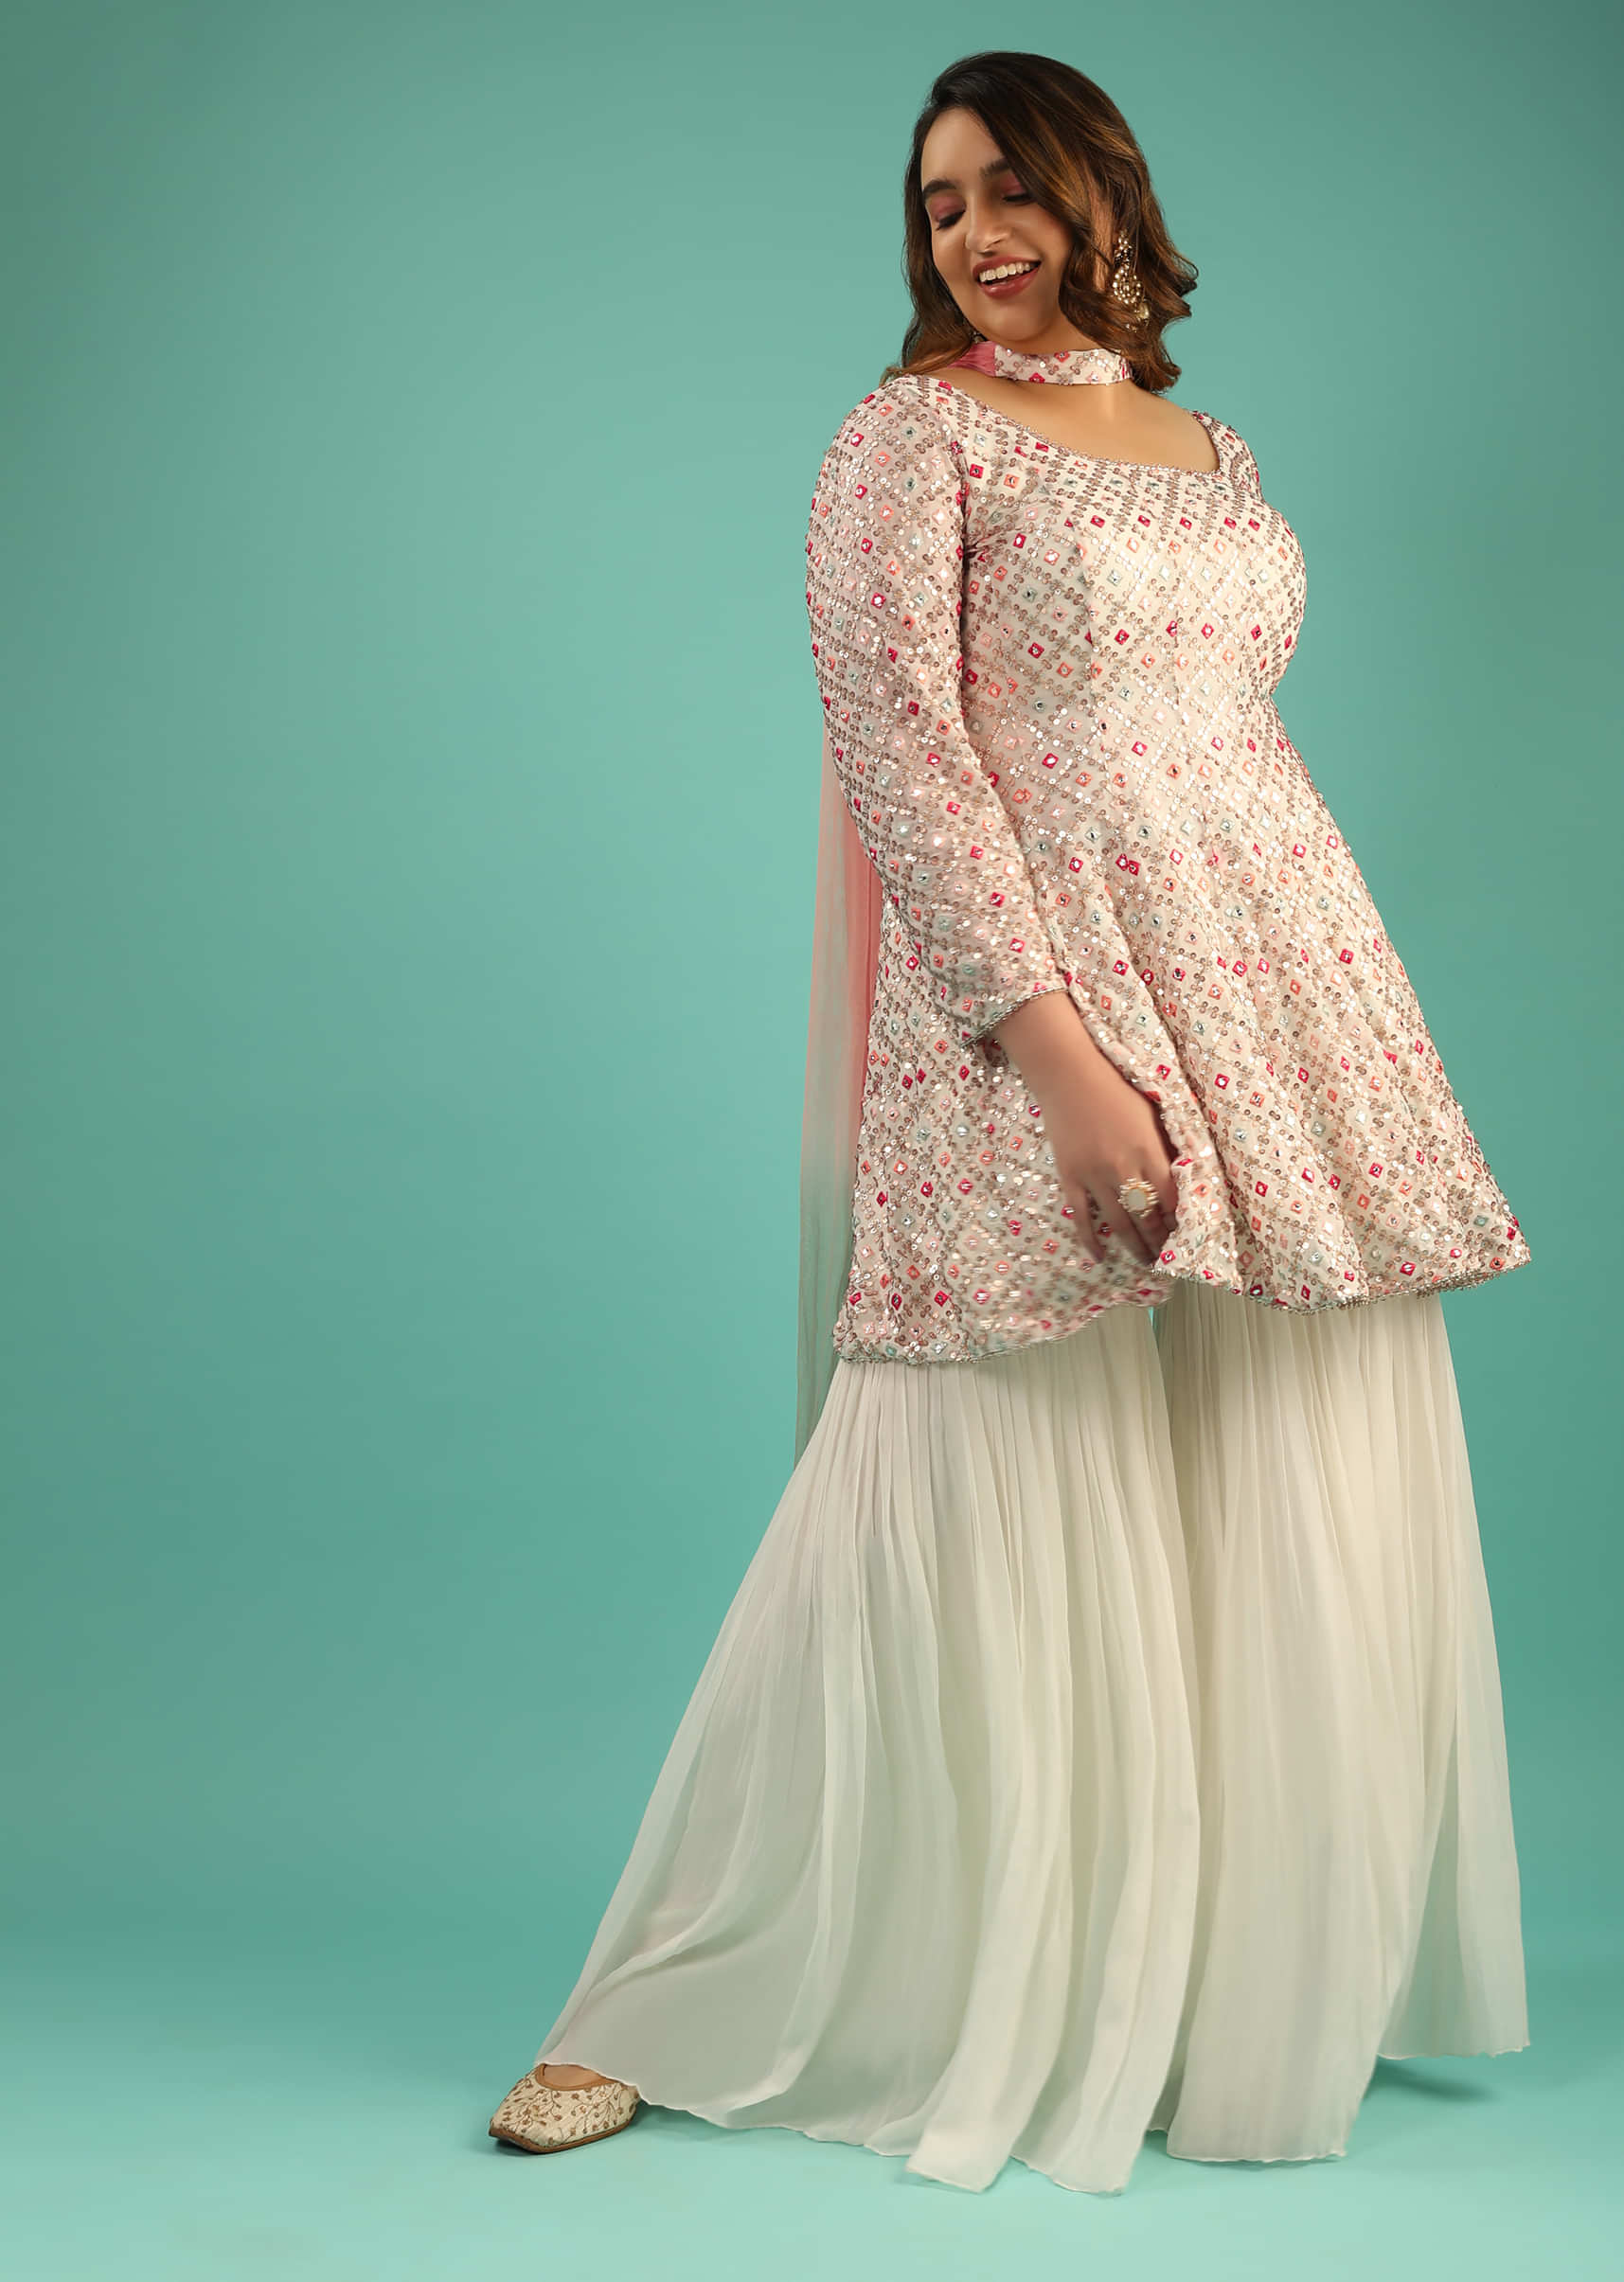 Off-White Georgette Sharara Suit with Peplum Kurti in Colorful Resham and Mirror Abla Jaal